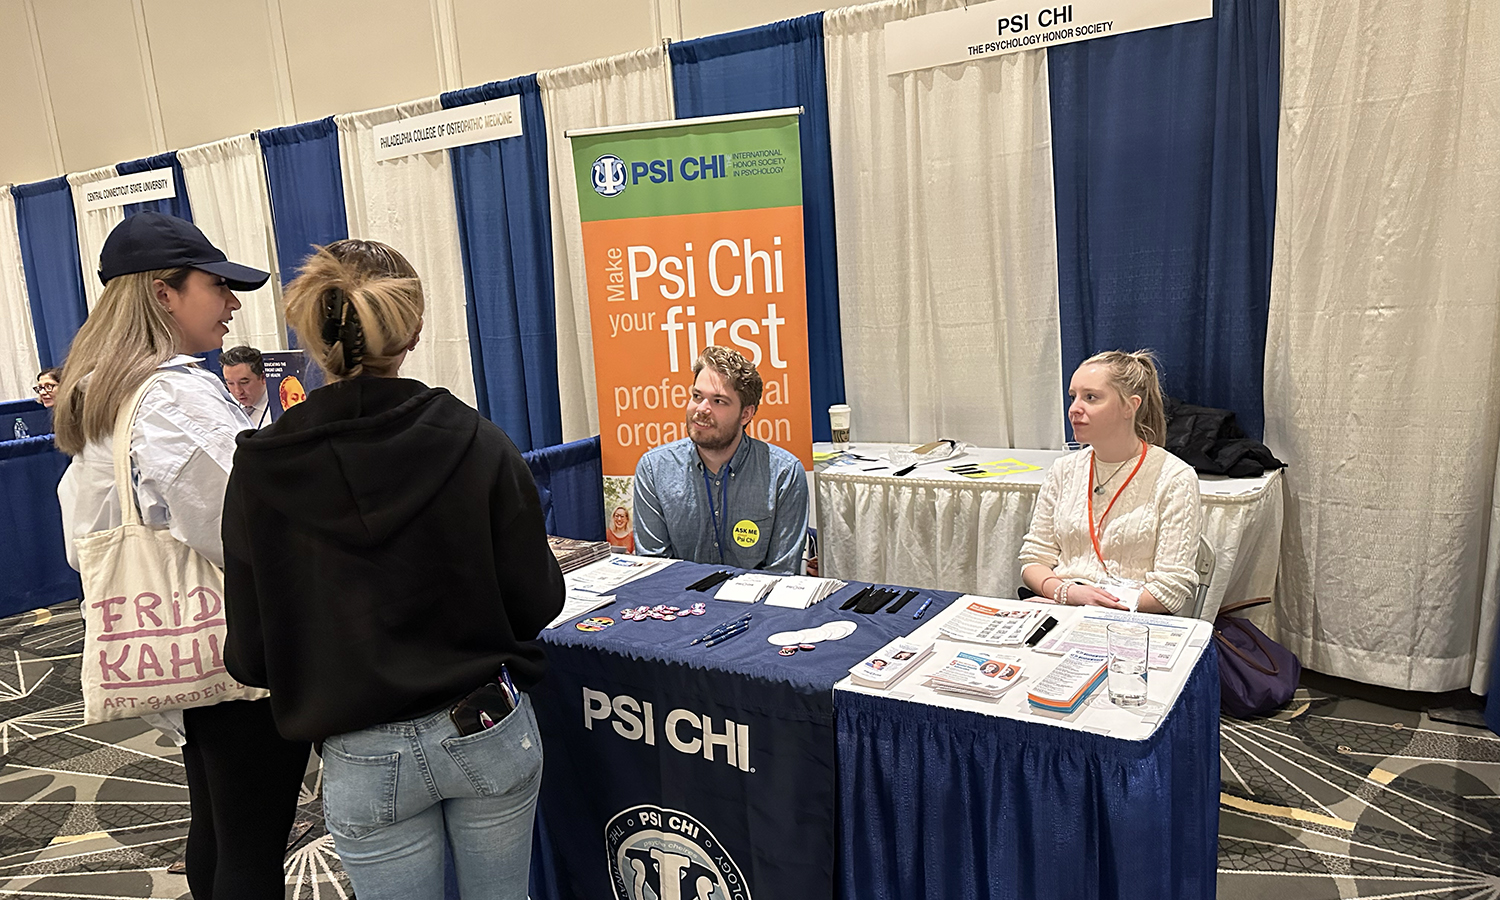 PSI CHI tabling at conference